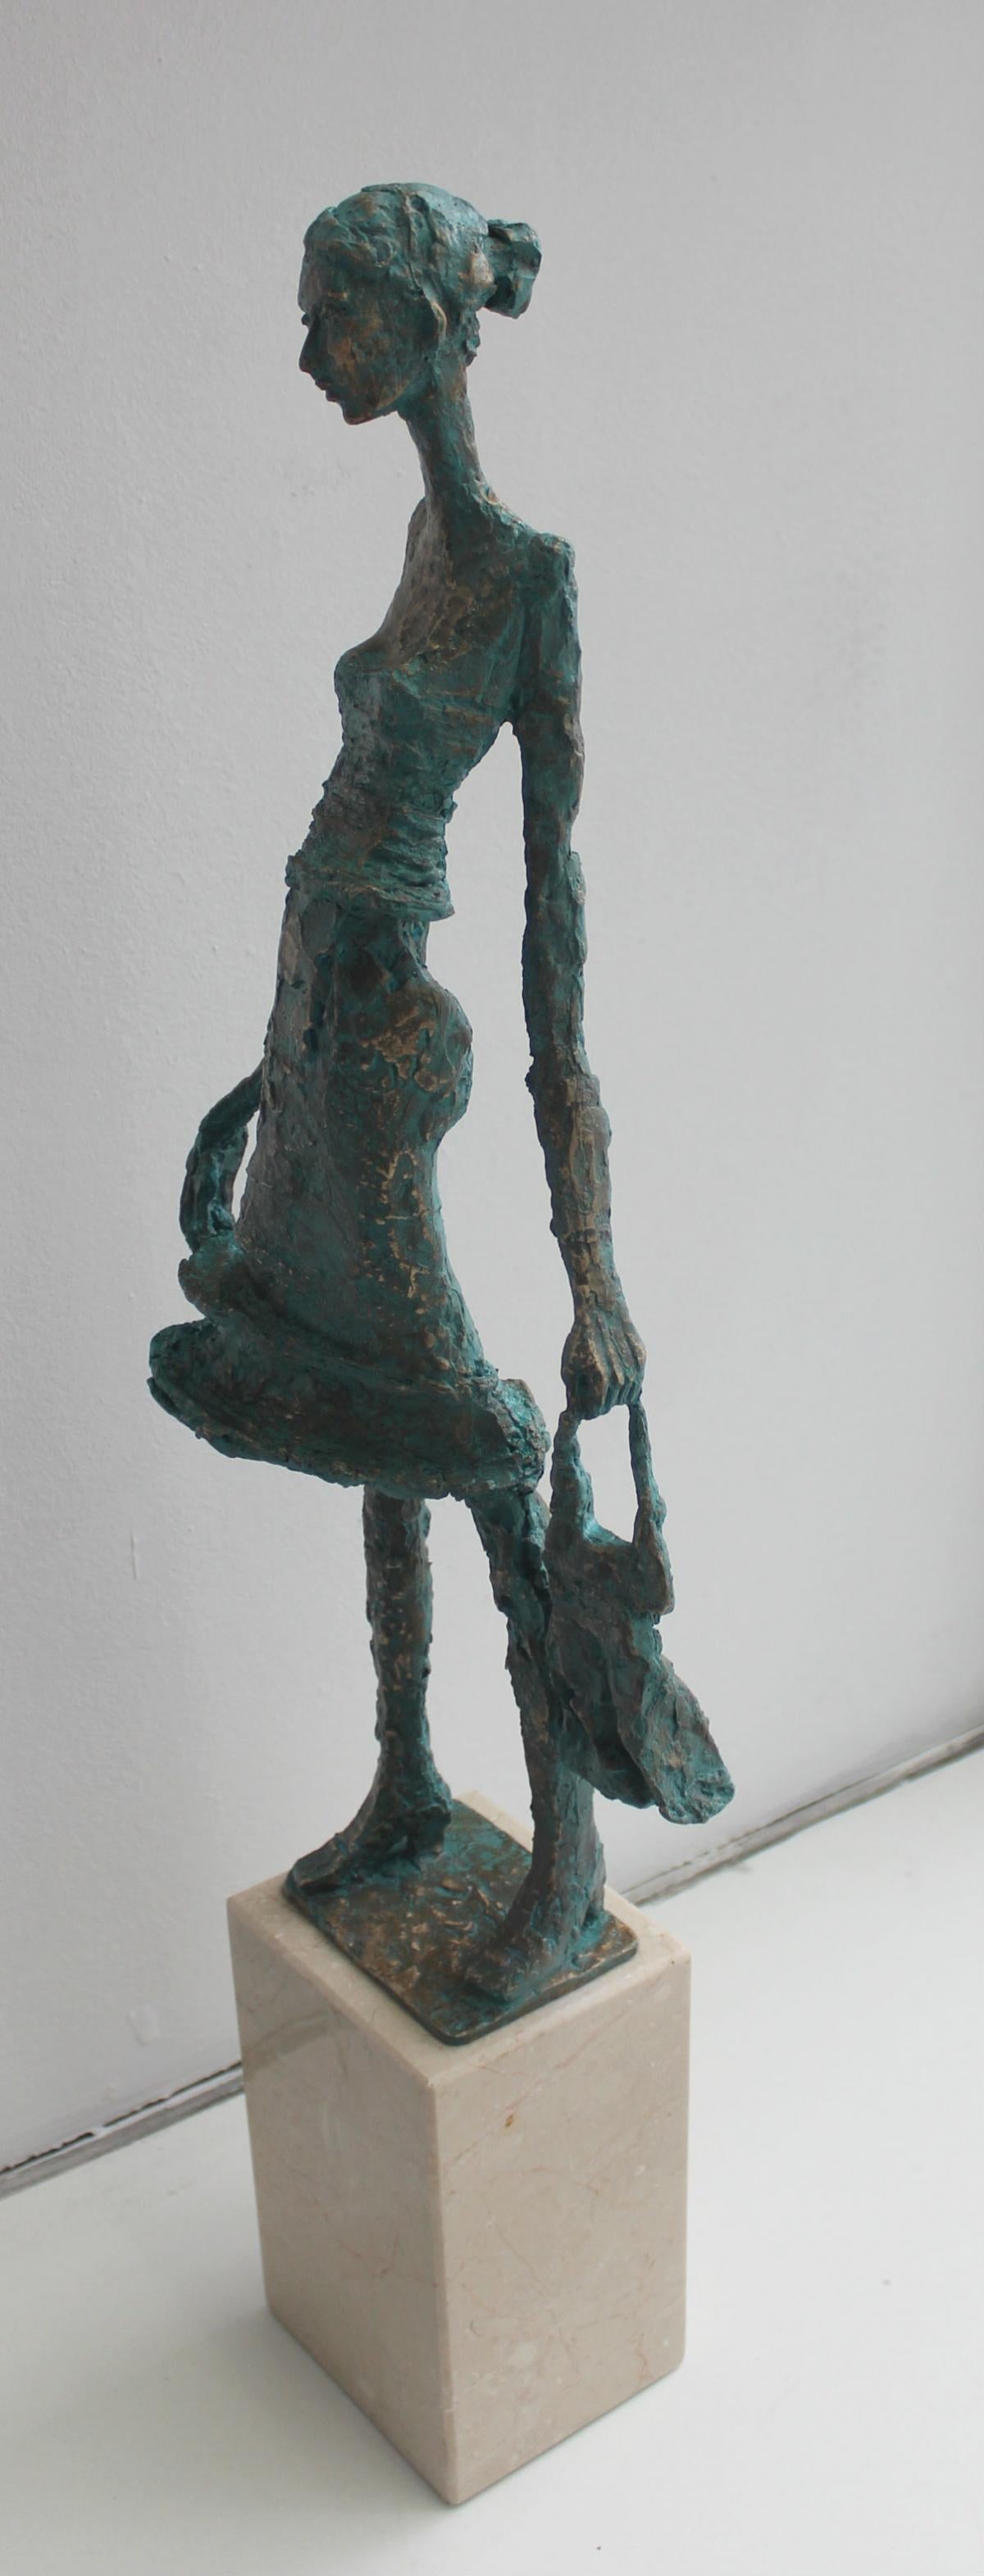 Woman with a purse - XXI century, Figurative sculpture, Bronze and marble - Other Art Style Sculpture by Jadwiga Lewandowska